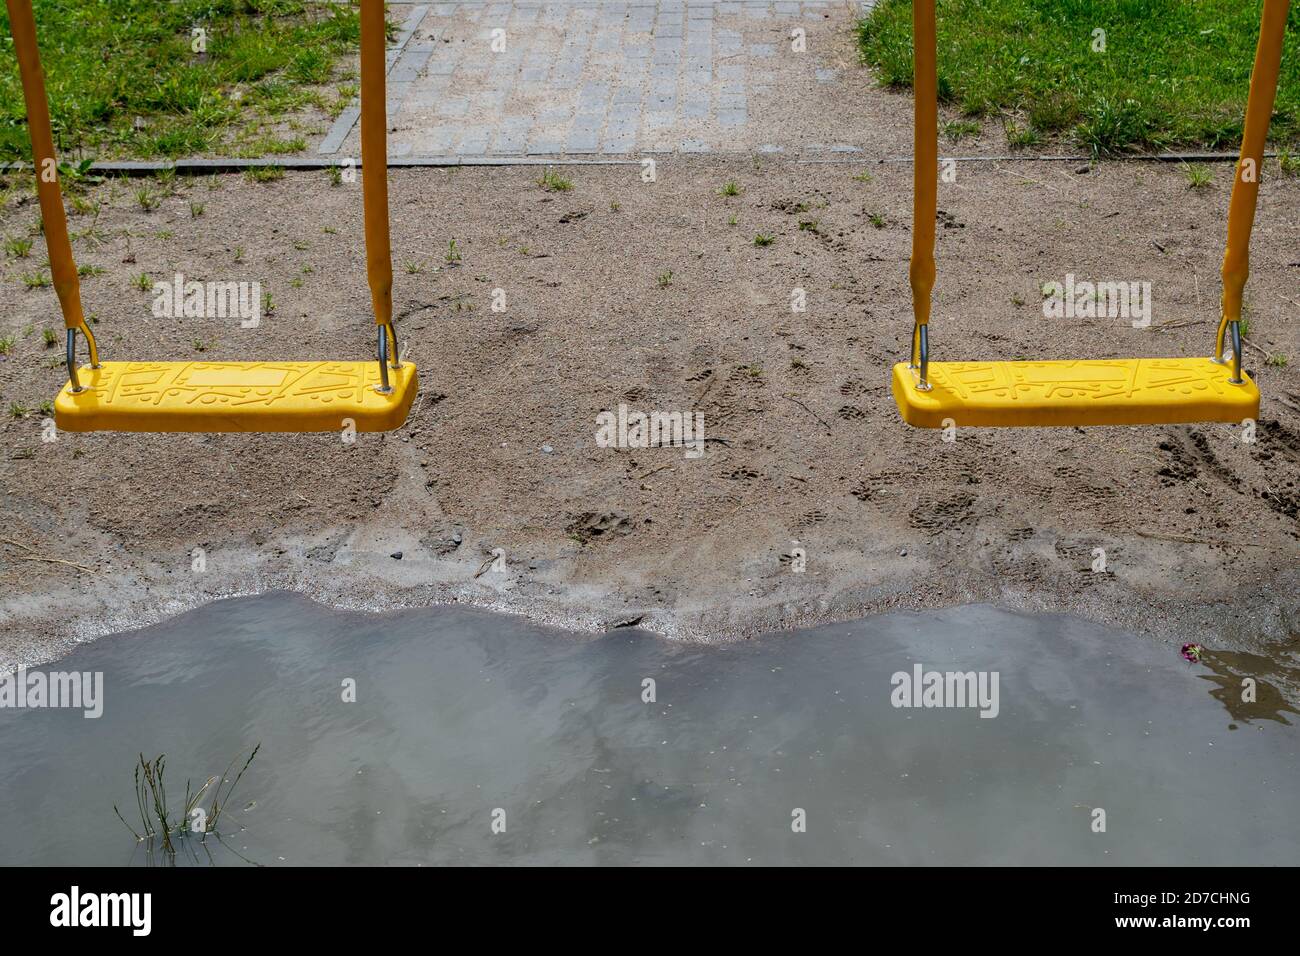 Plastic suspension swings hanging over large puddle after rain, which reflects clouds. Composition against background of sandy soil and paved sidewalk Stock Photo